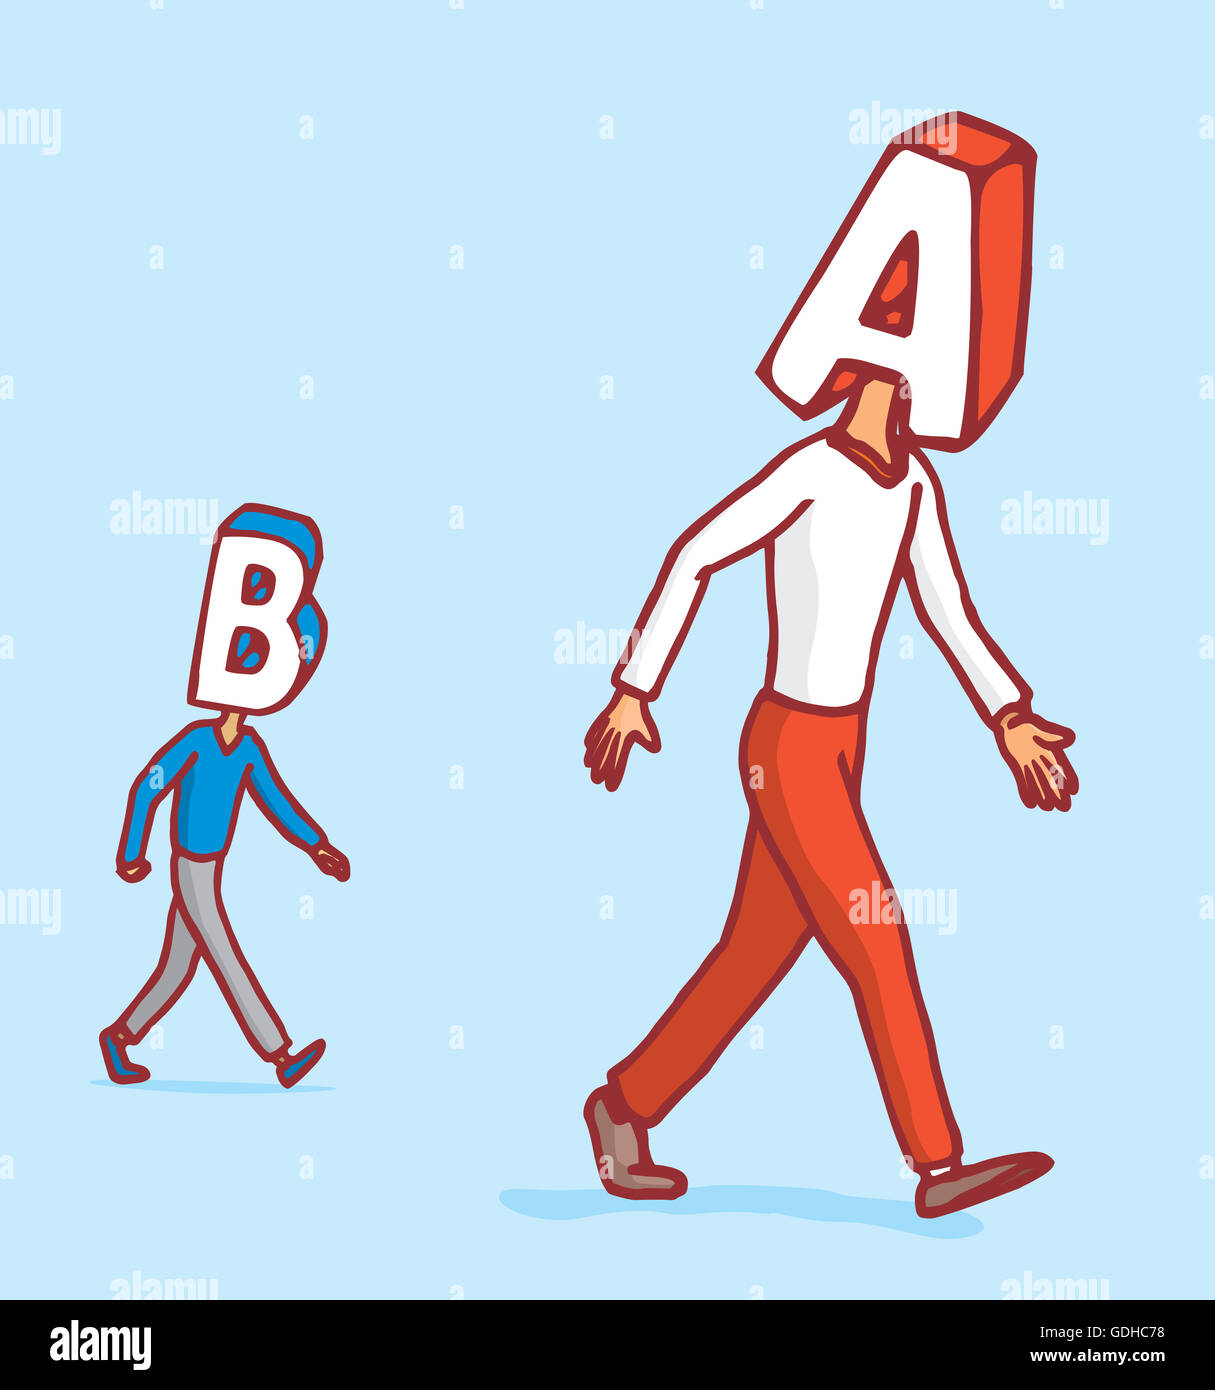 Cartoon illustration of competition between two letter heads walking Stock Photo